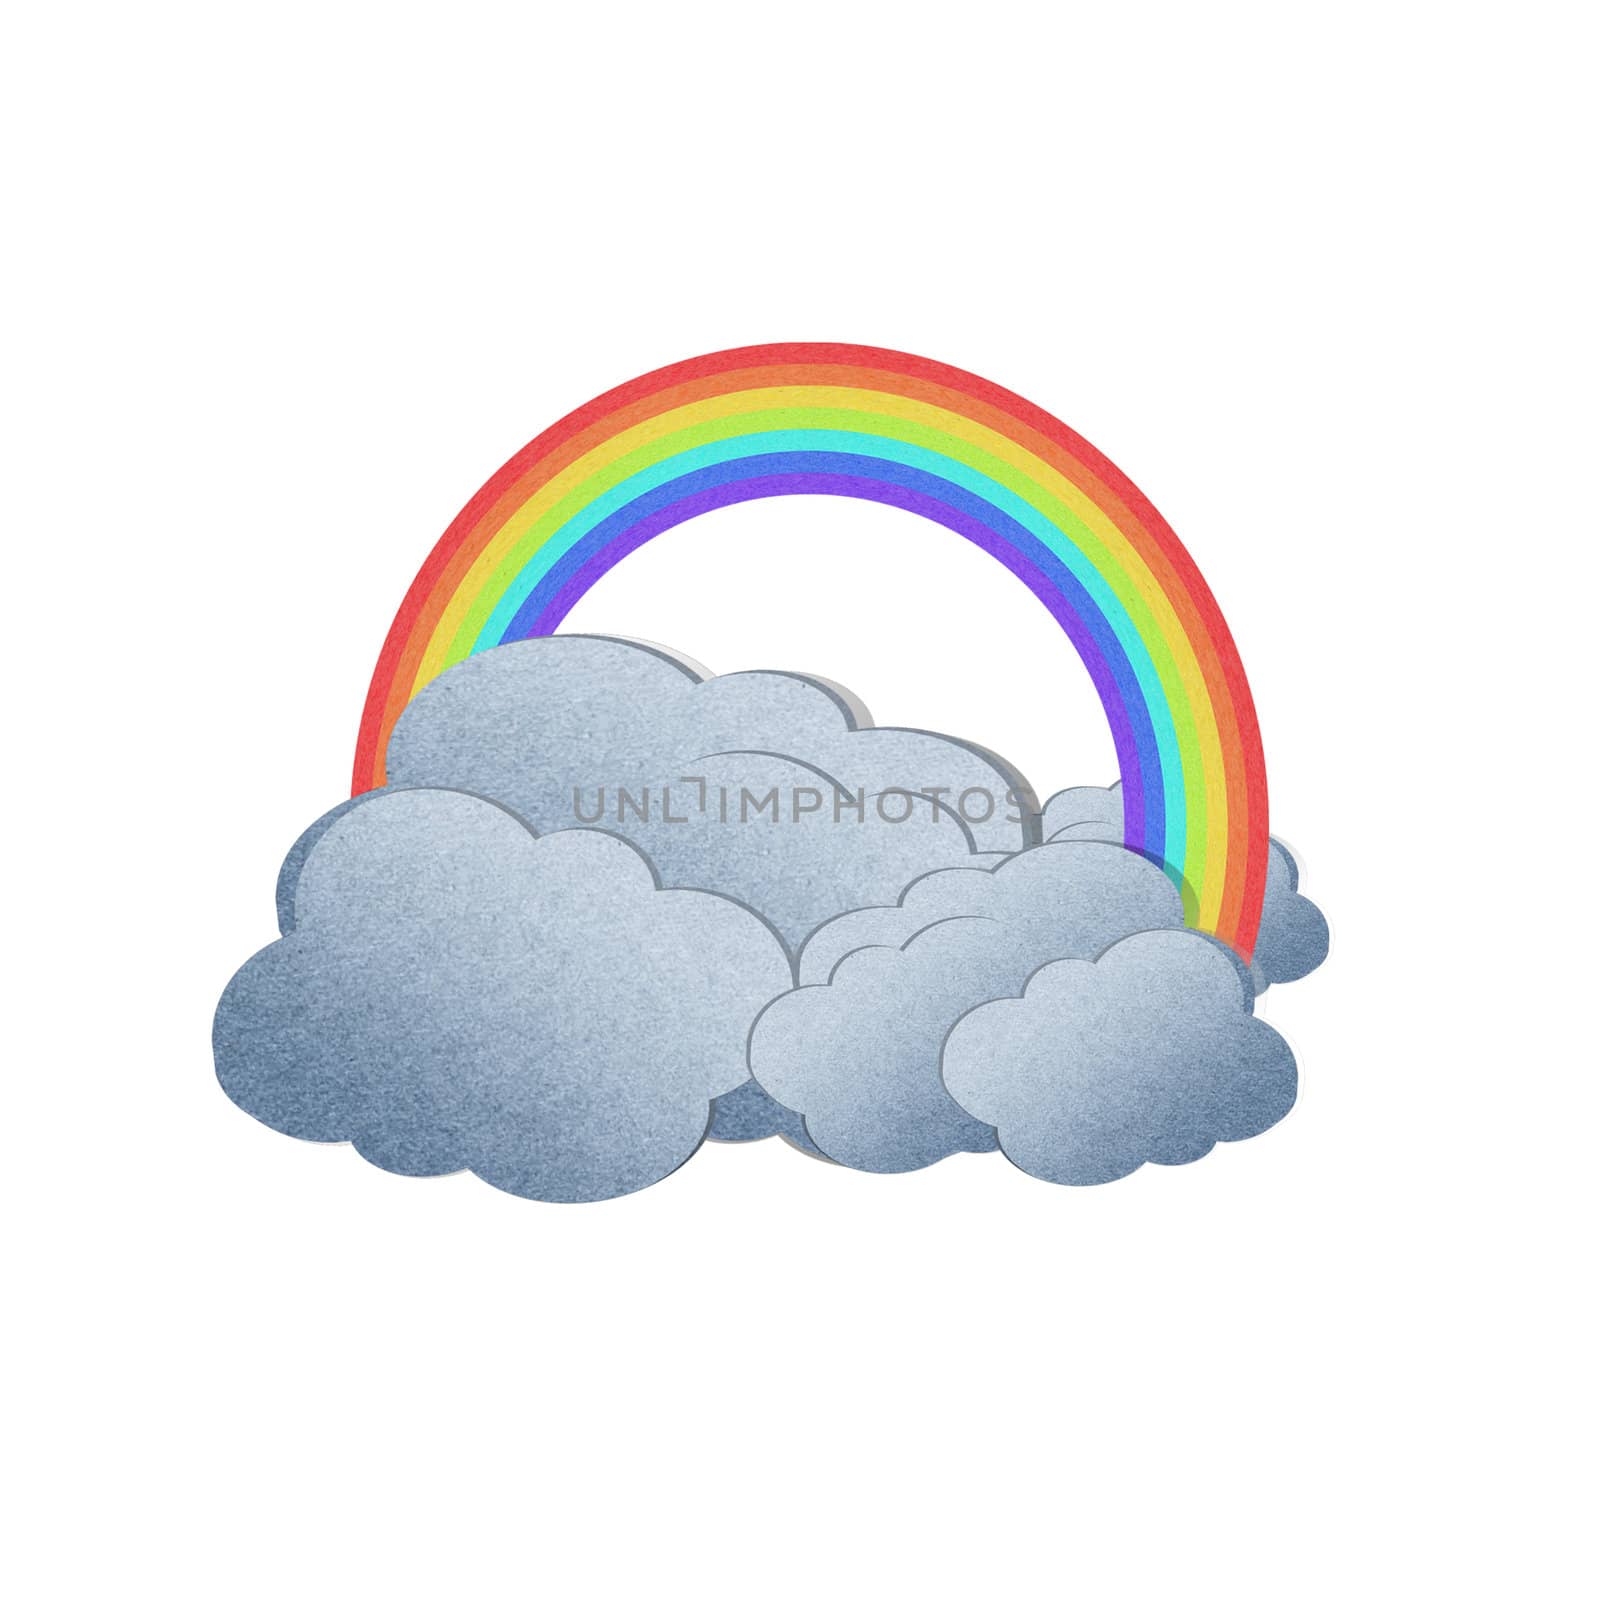  Grunge recycled paper rainbow on white background by jakgree